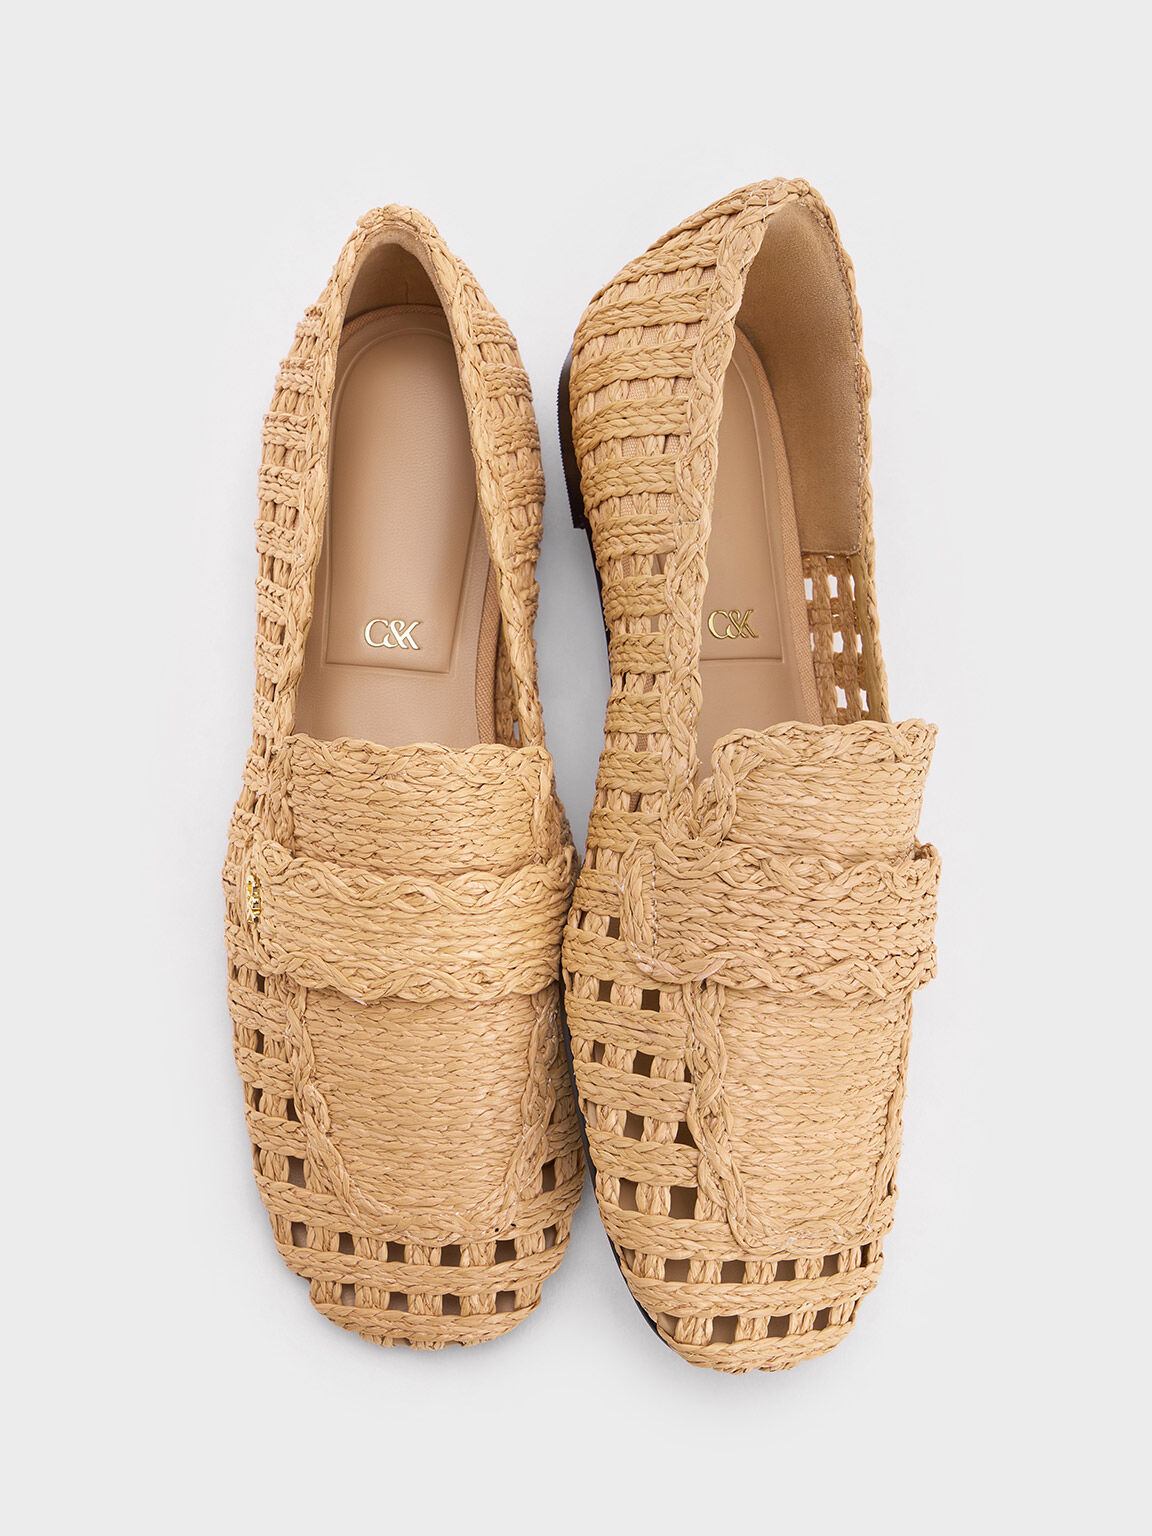 Raffia Woven Loafers, Sand, hi-res